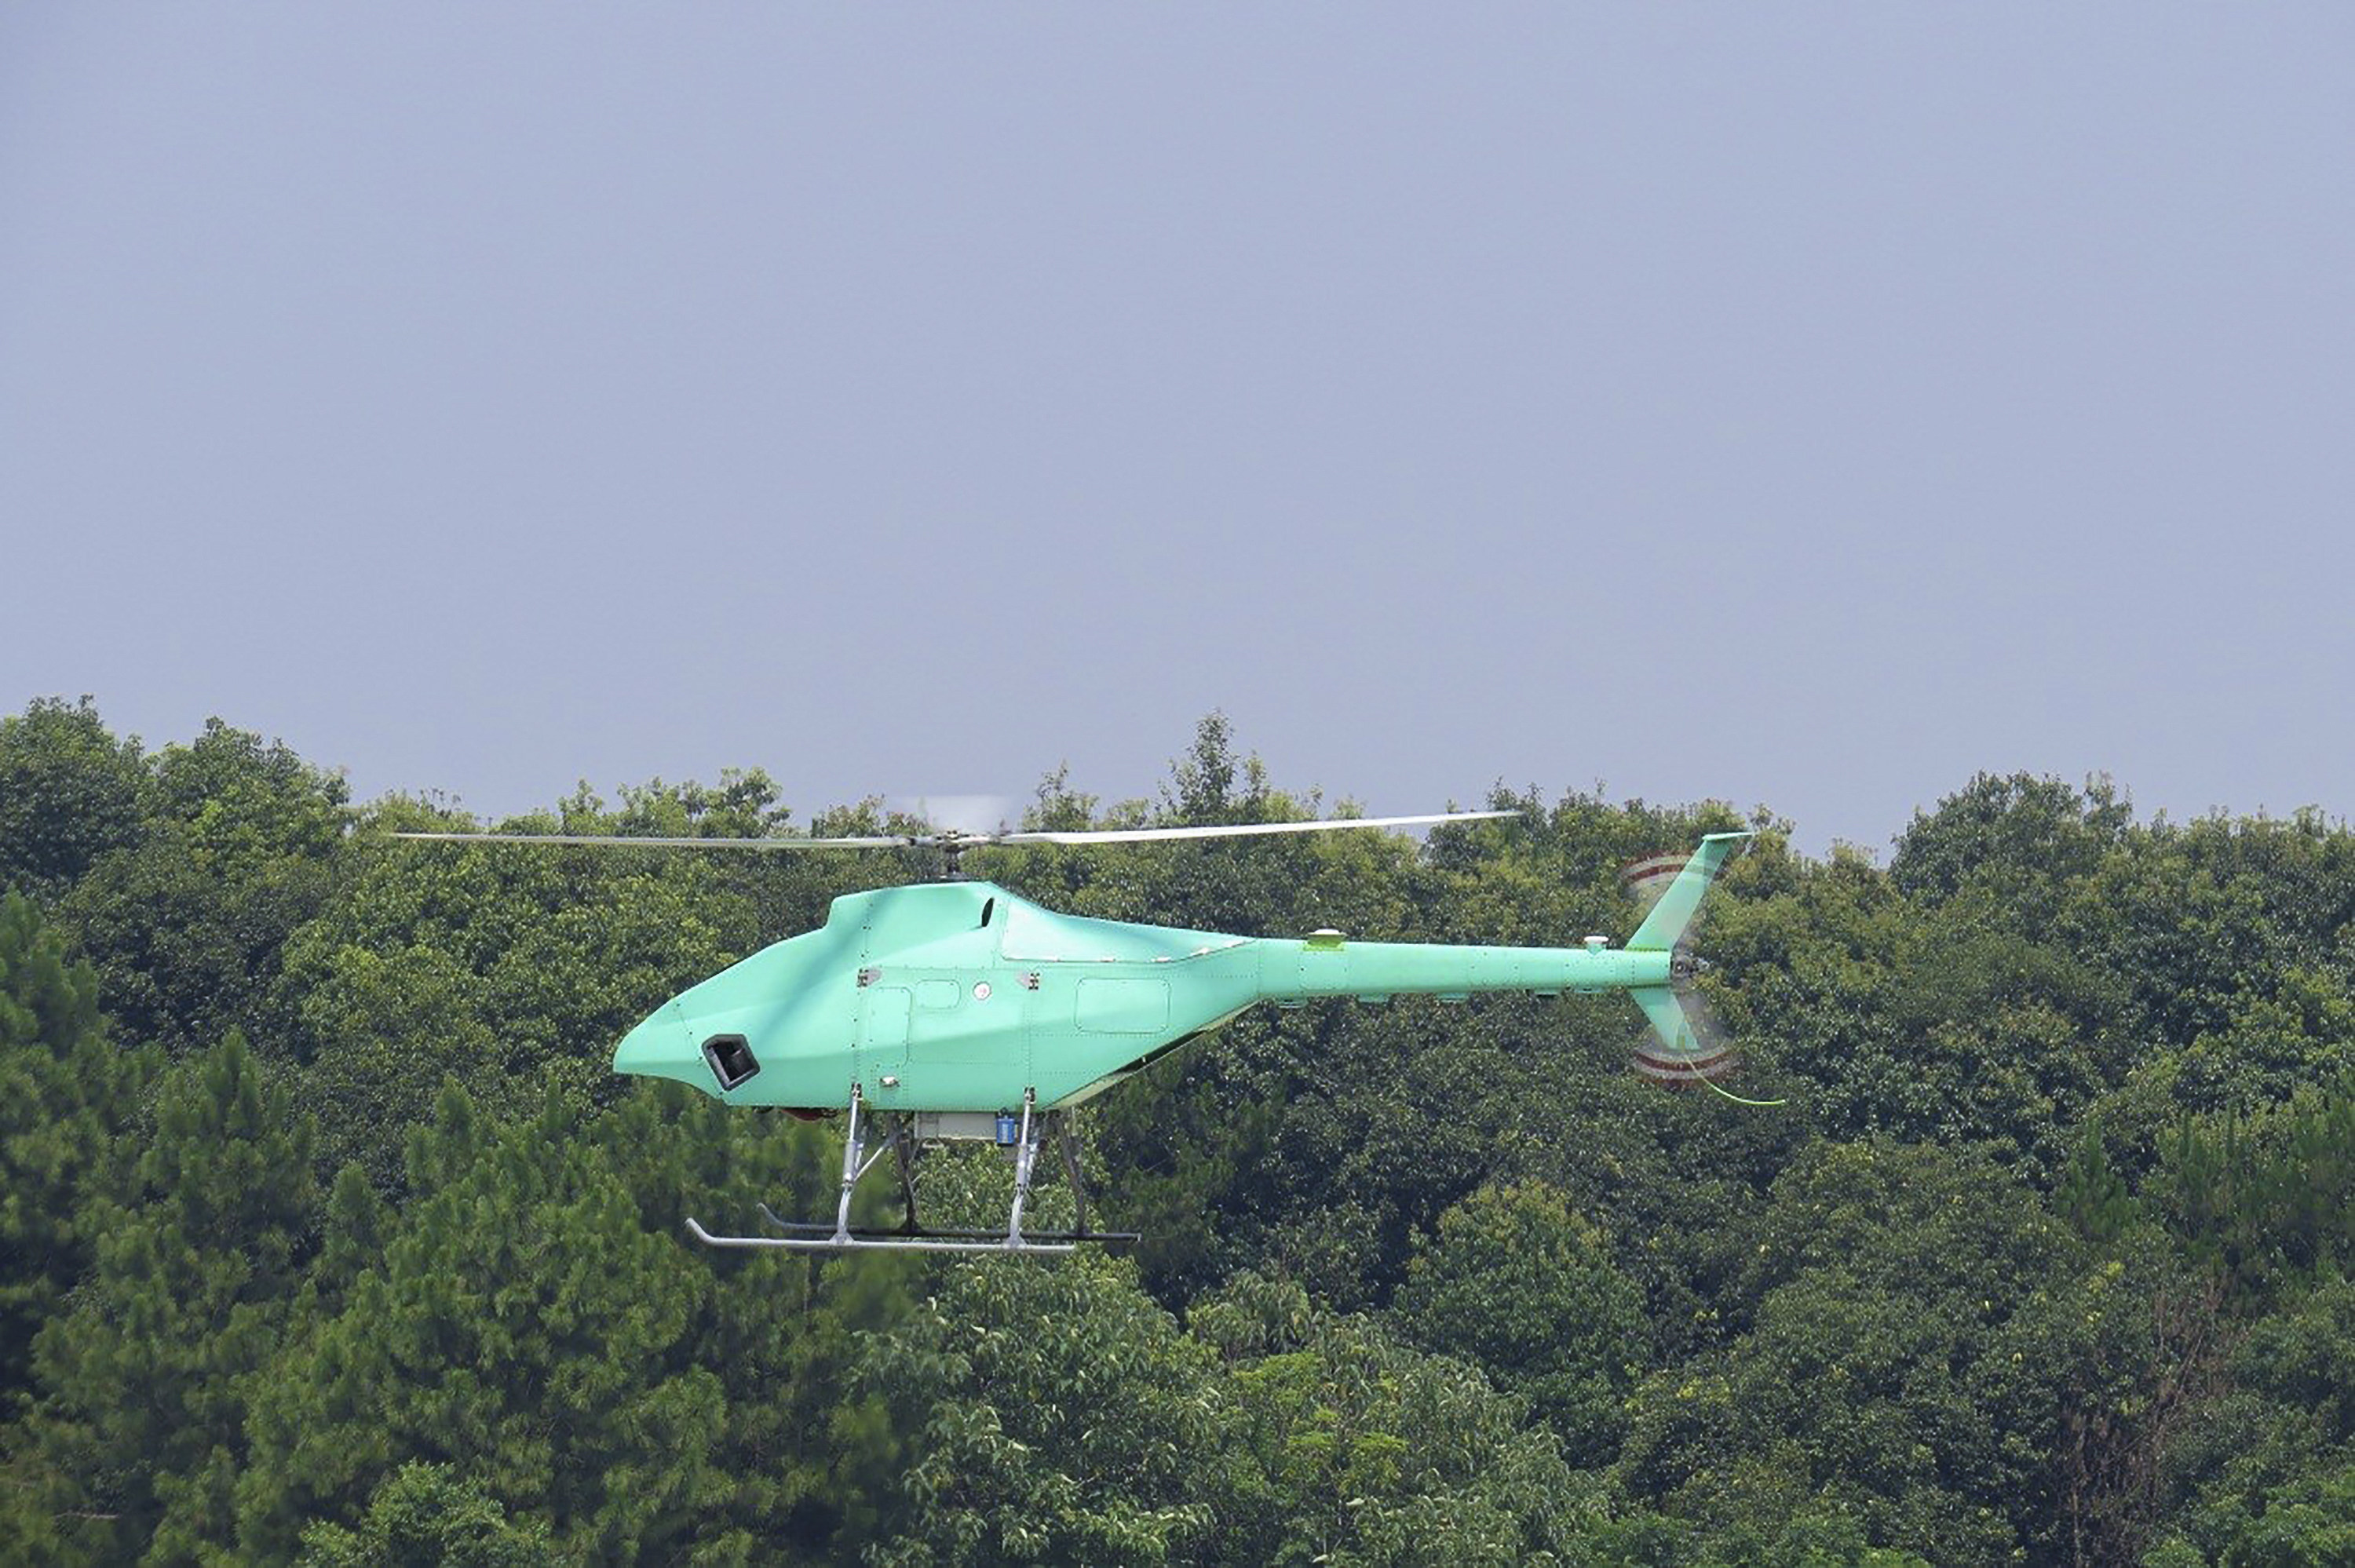 The AR-500CJ unmanned vehicle had a maiden flight in China’s eastern Jiangxi Province recently. It brings further diversity and versatility to China’s drone fleet. Photo: Handout